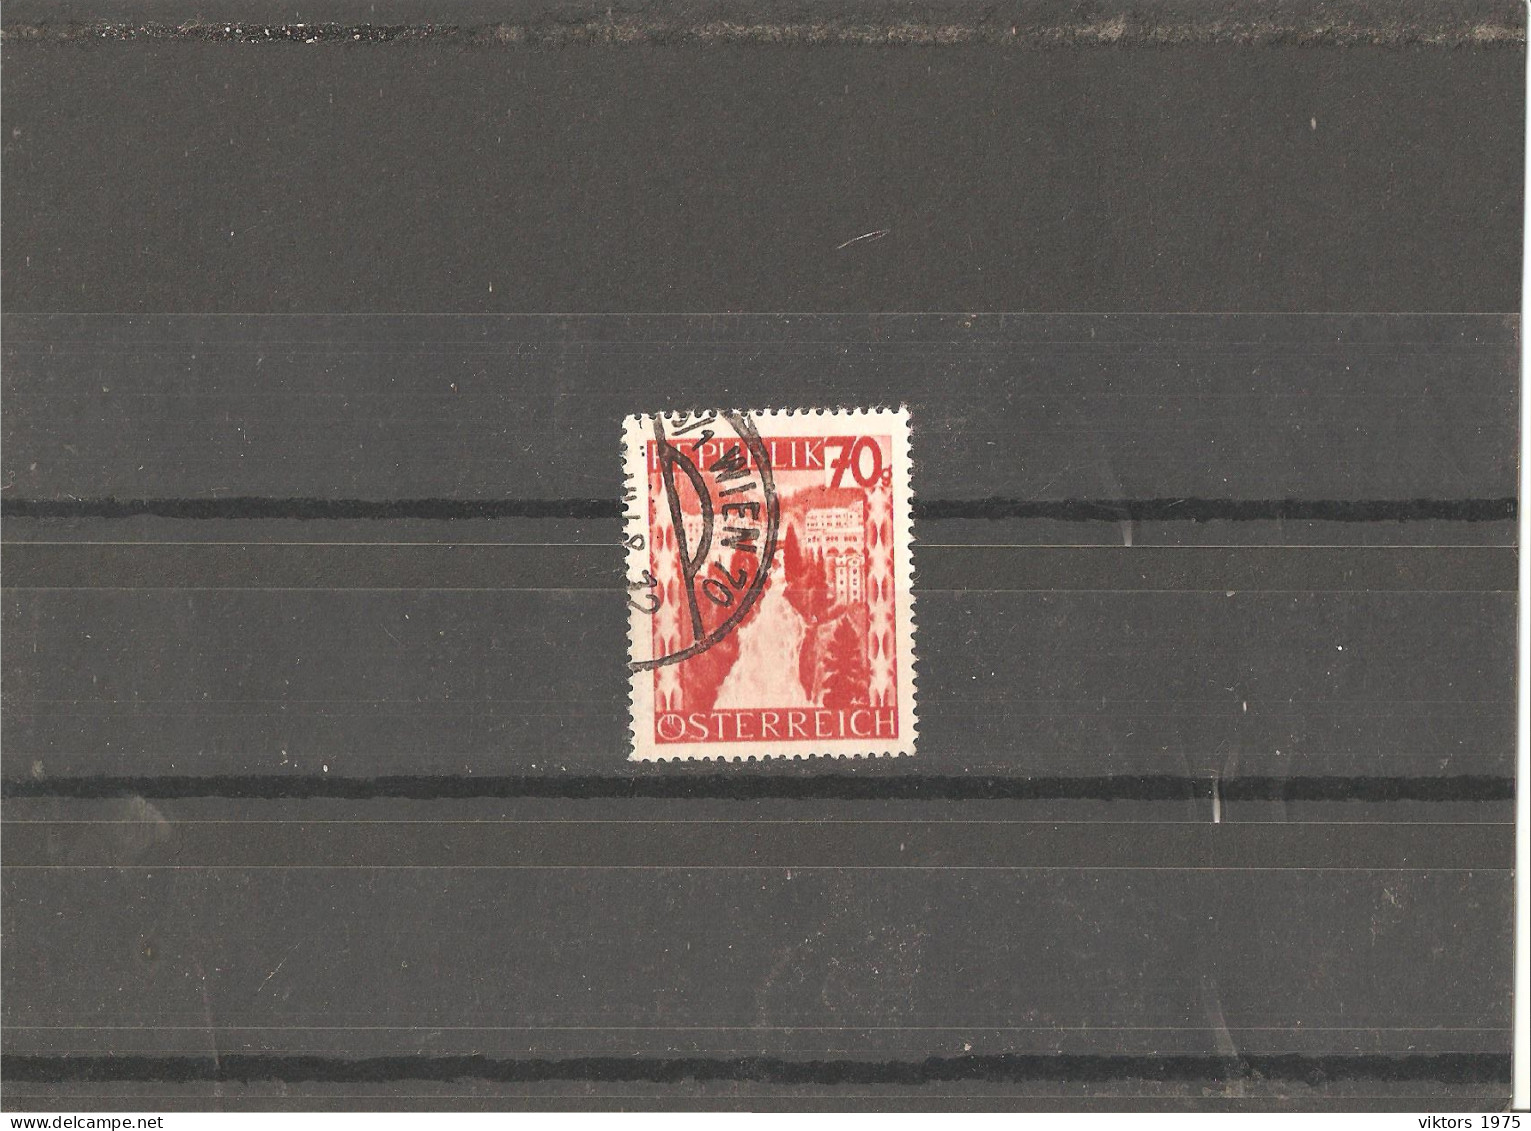 Used Stamp Nr.847 In MICHEL Catalog - Used Stamps